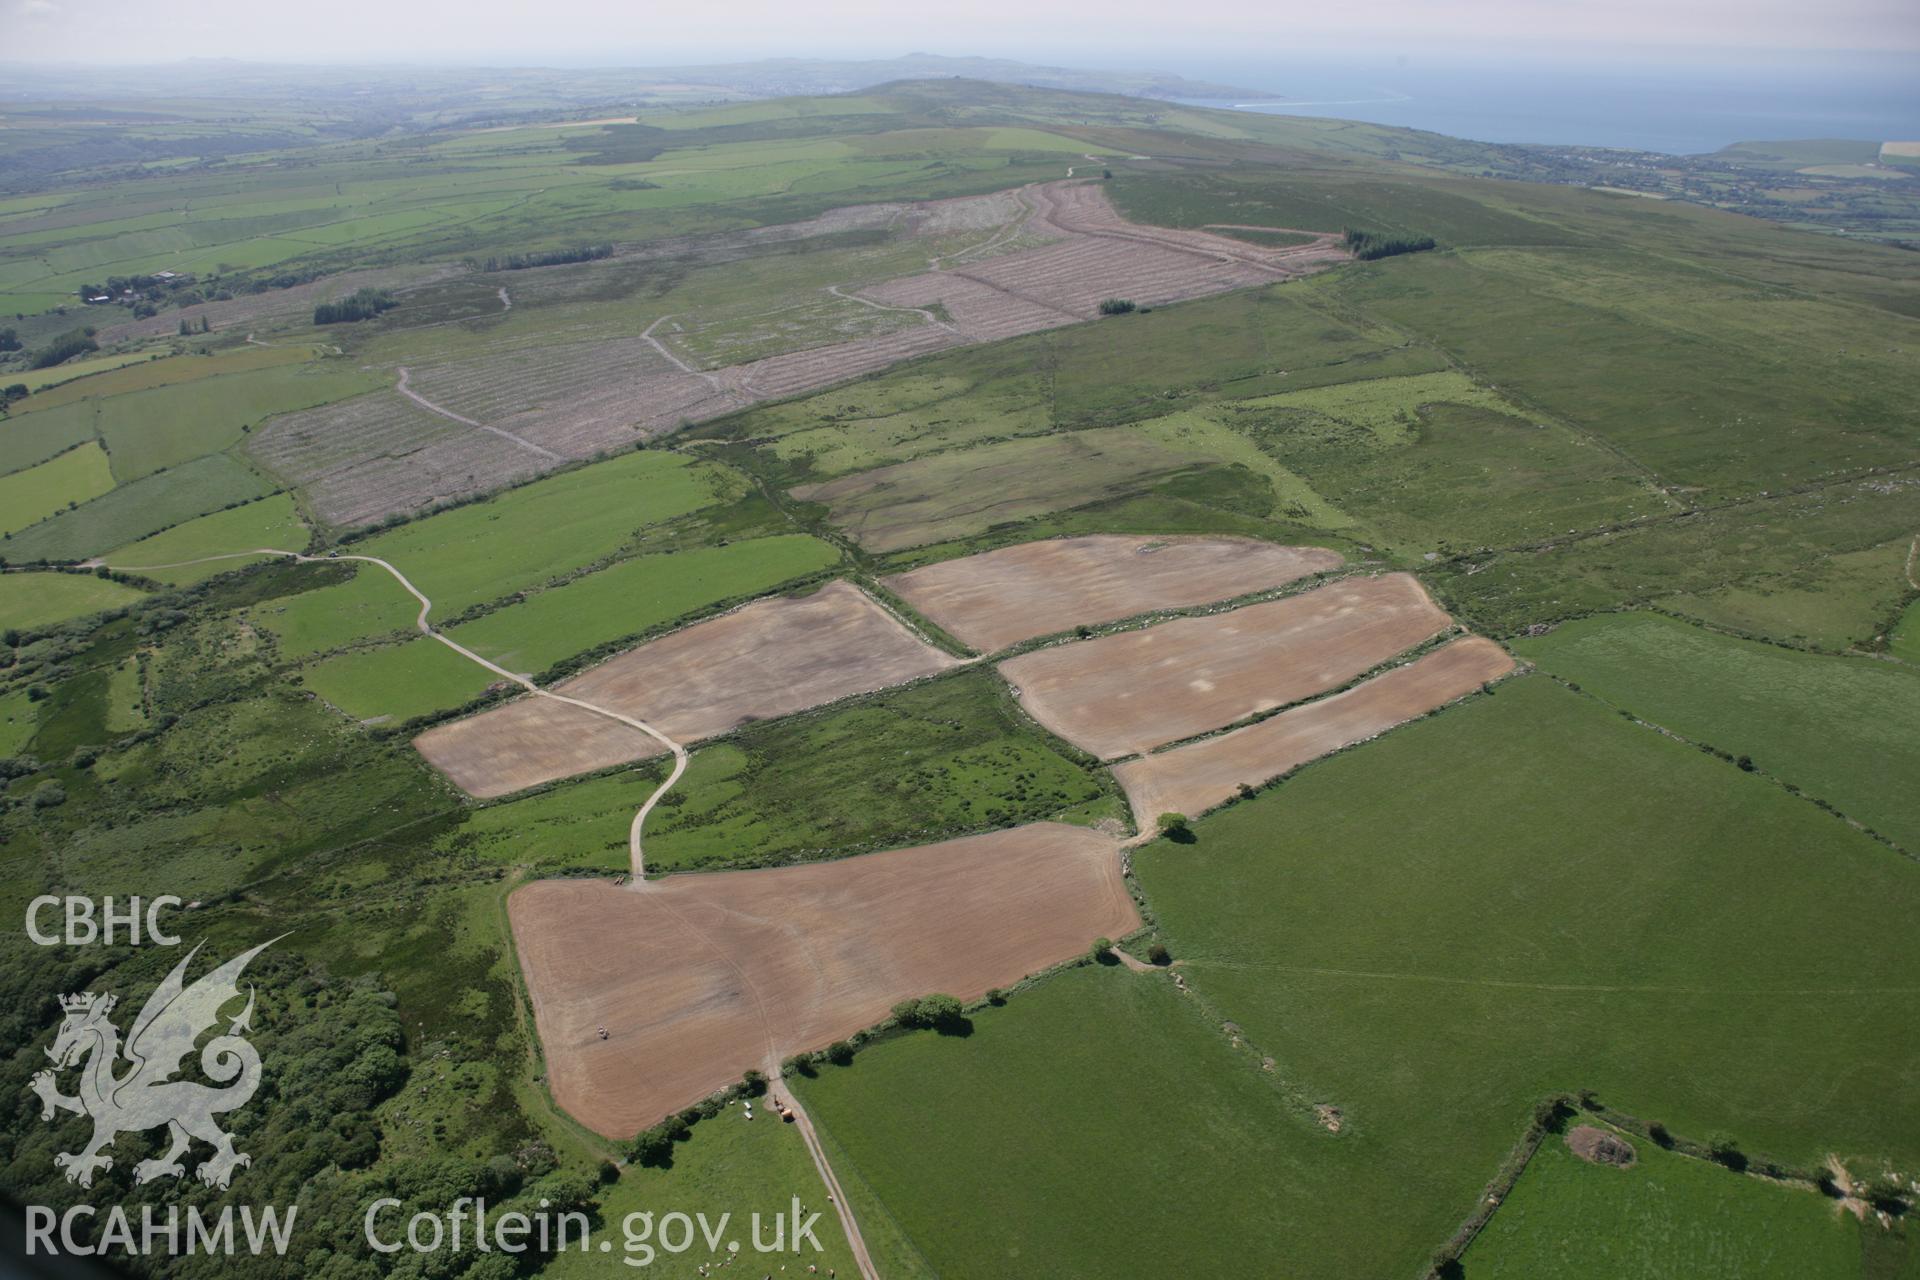 RCAHMW colour oblique aerial photograph of fields south of Carn-ingli Common, after heavy ploughing, Gallt Llanerch. Taken on 23 June 2005 by Toby Driver